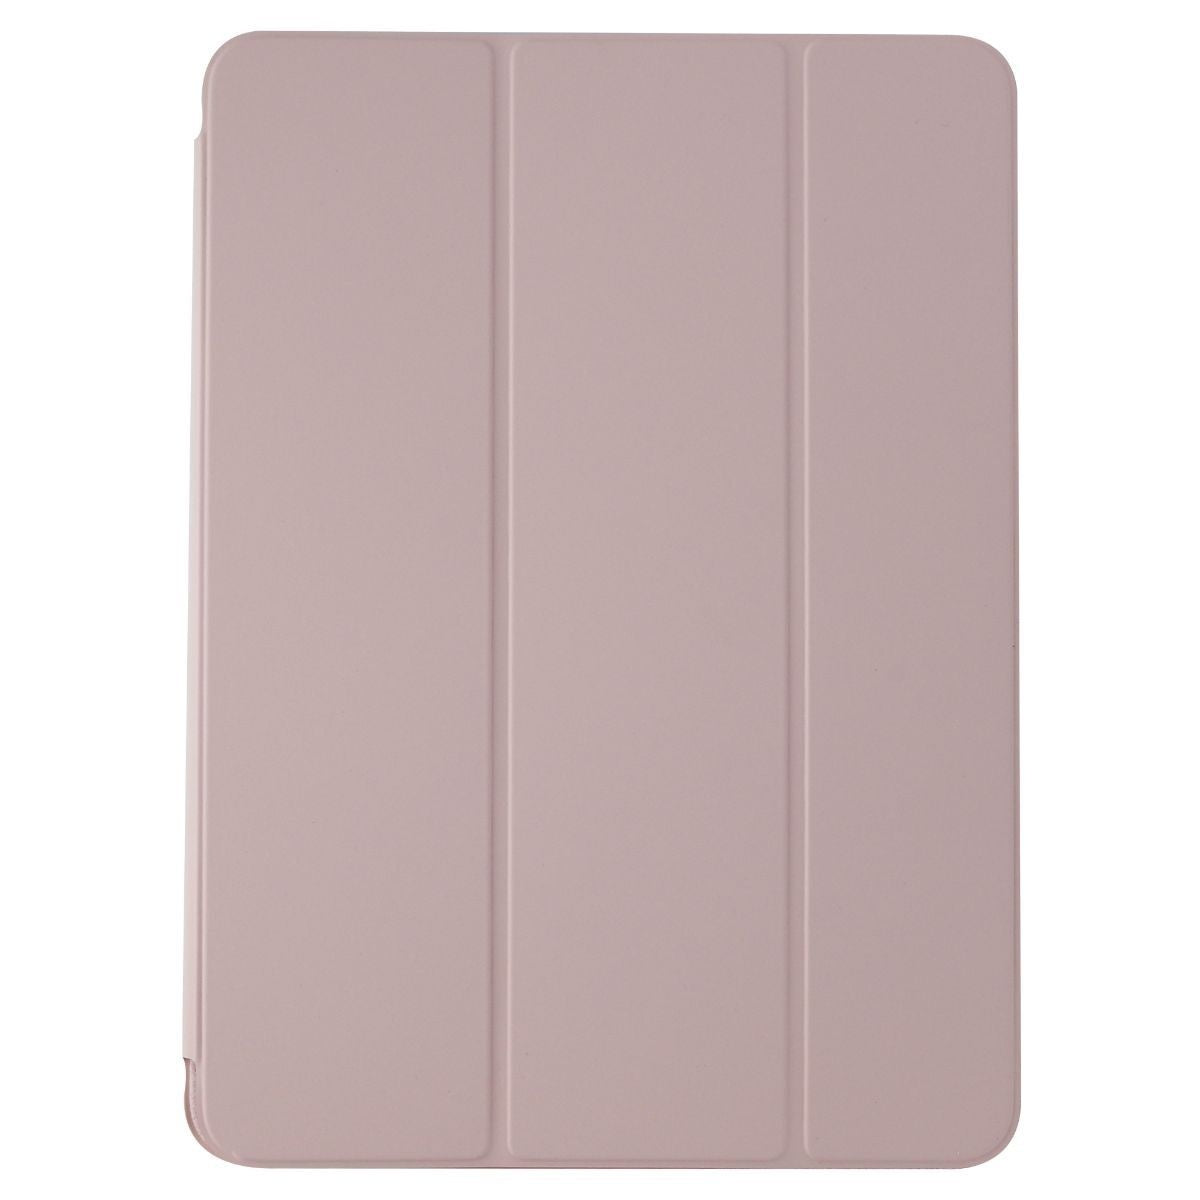 Apple Smart Folio Cover (MRX92ZM/A) for iPad Pro 11-inch (2018) - Soft Pink iPad/Tablet Accessories - Cases, Covers, Keyboard Folios Apple    - Simple Cell Bulk Wholesale Pricing - USA Seller